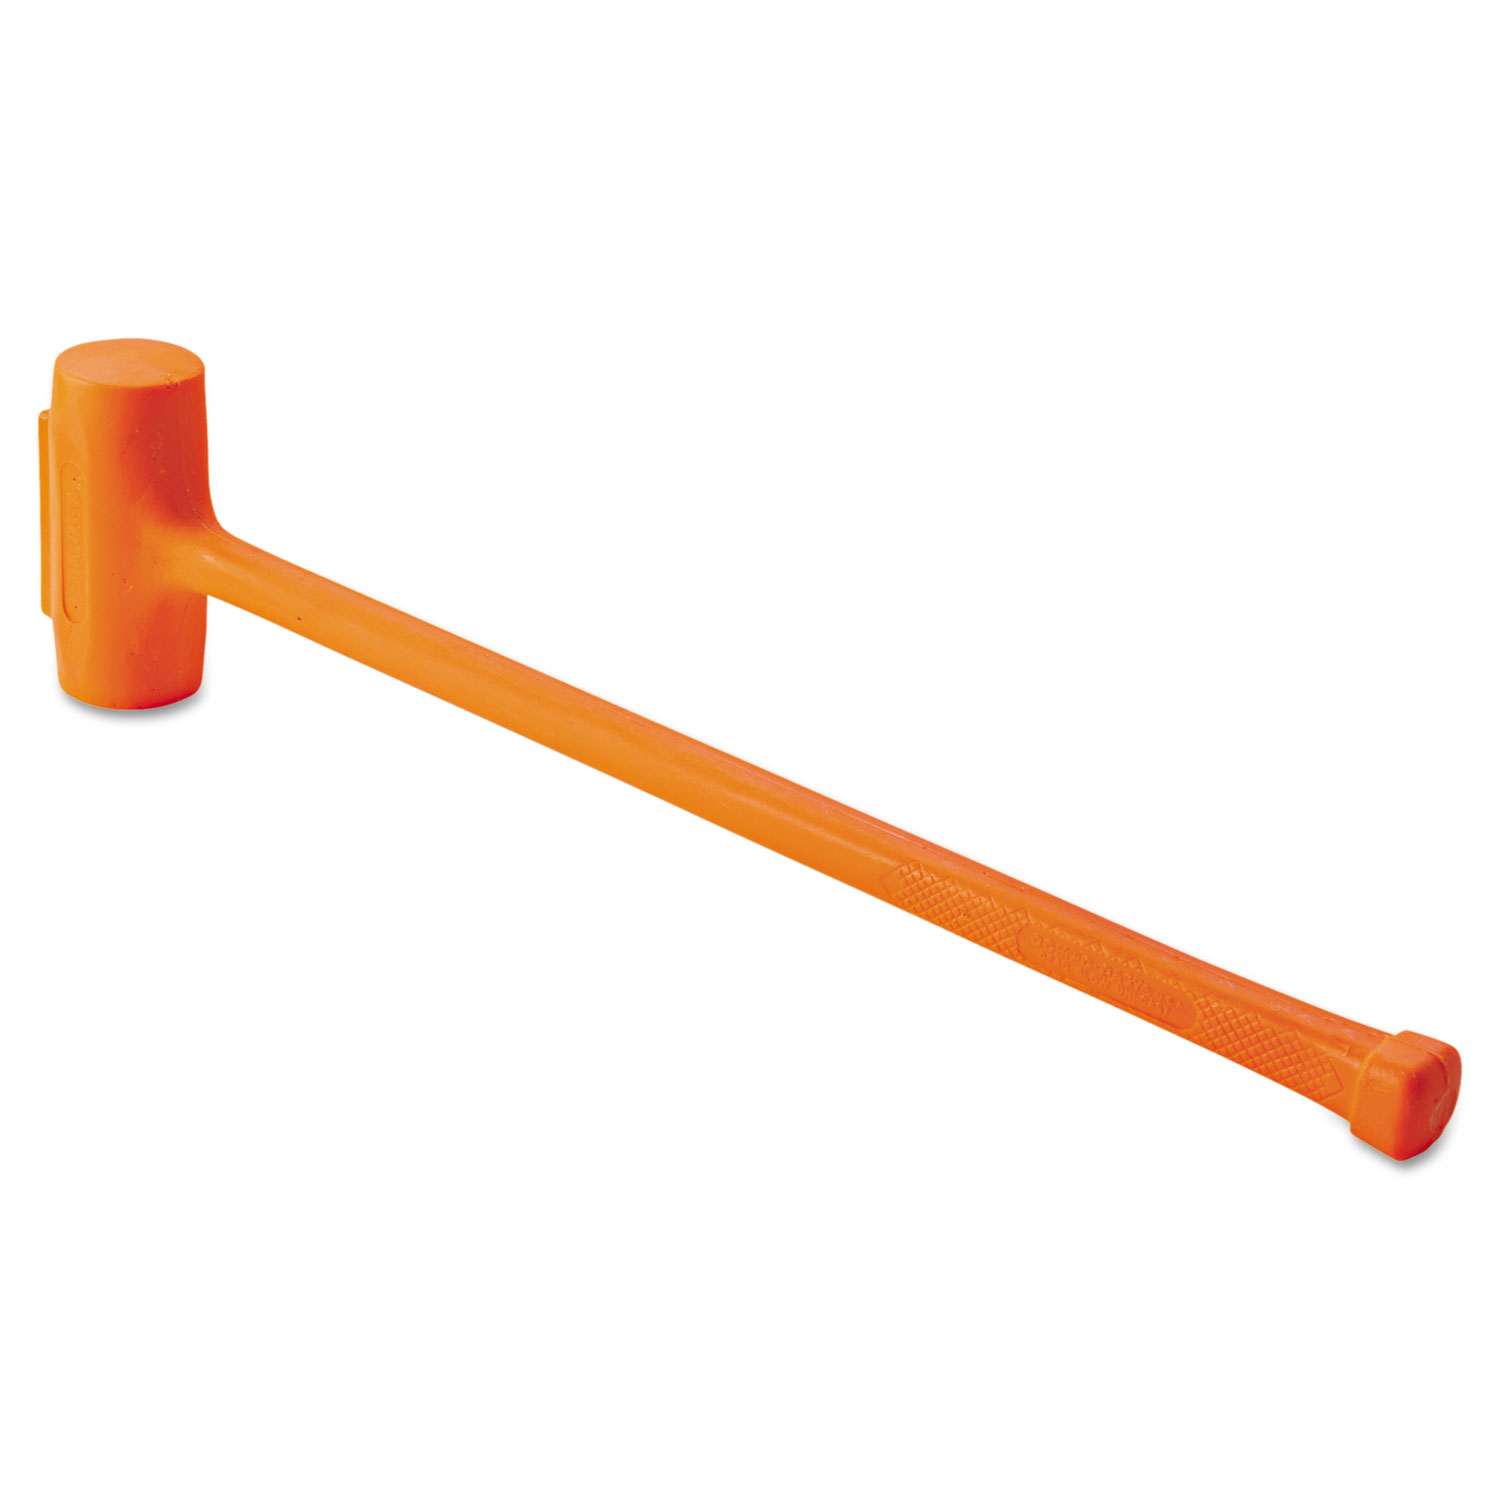 Compo-Cast Soft-Face Sledge Hammer, 11.5lb, Forged Steel Handle